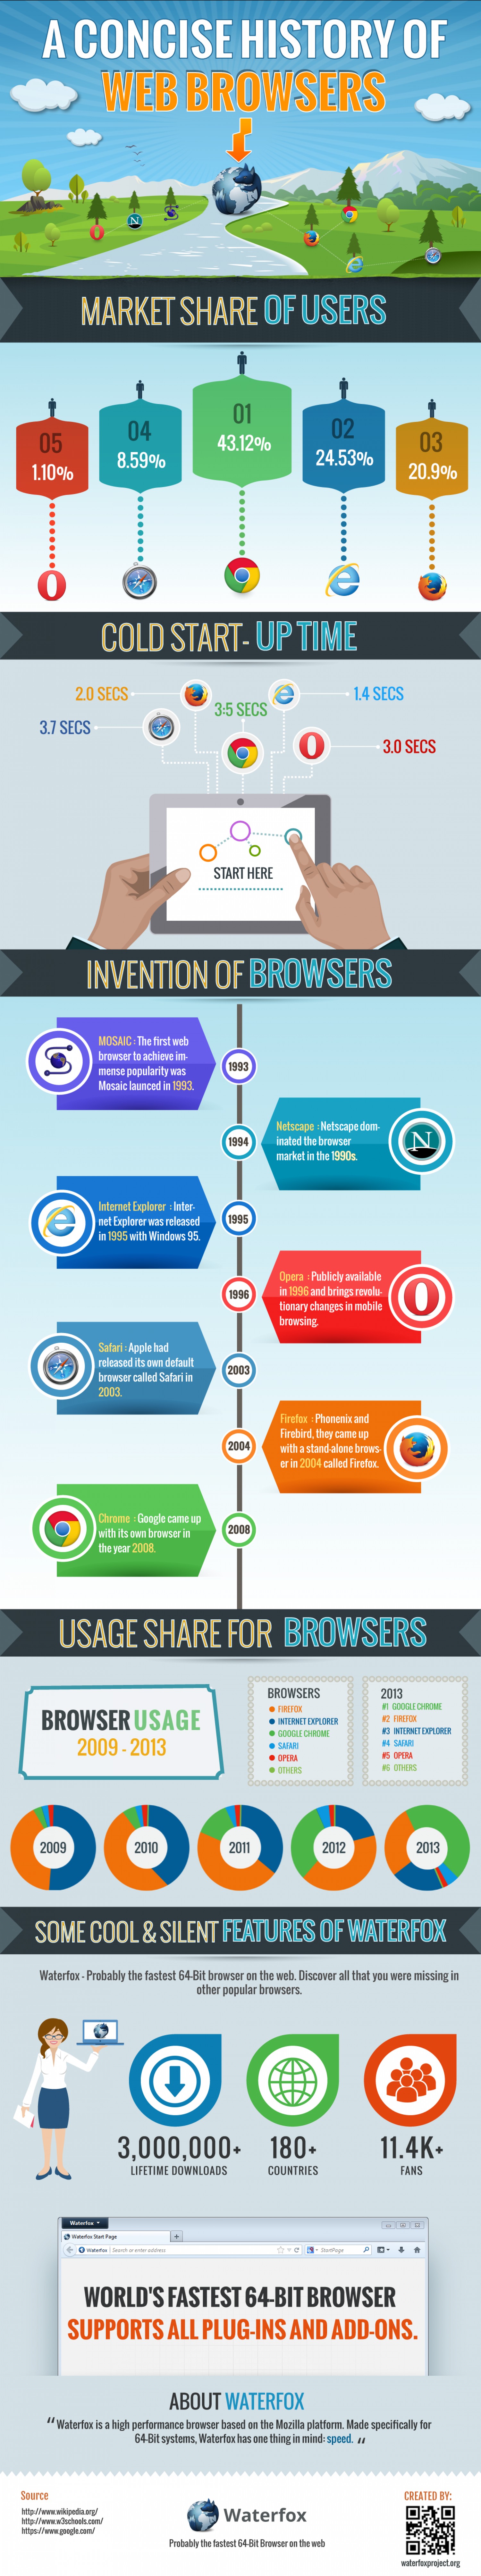 A Concise History of Web Browsers by Waterfox